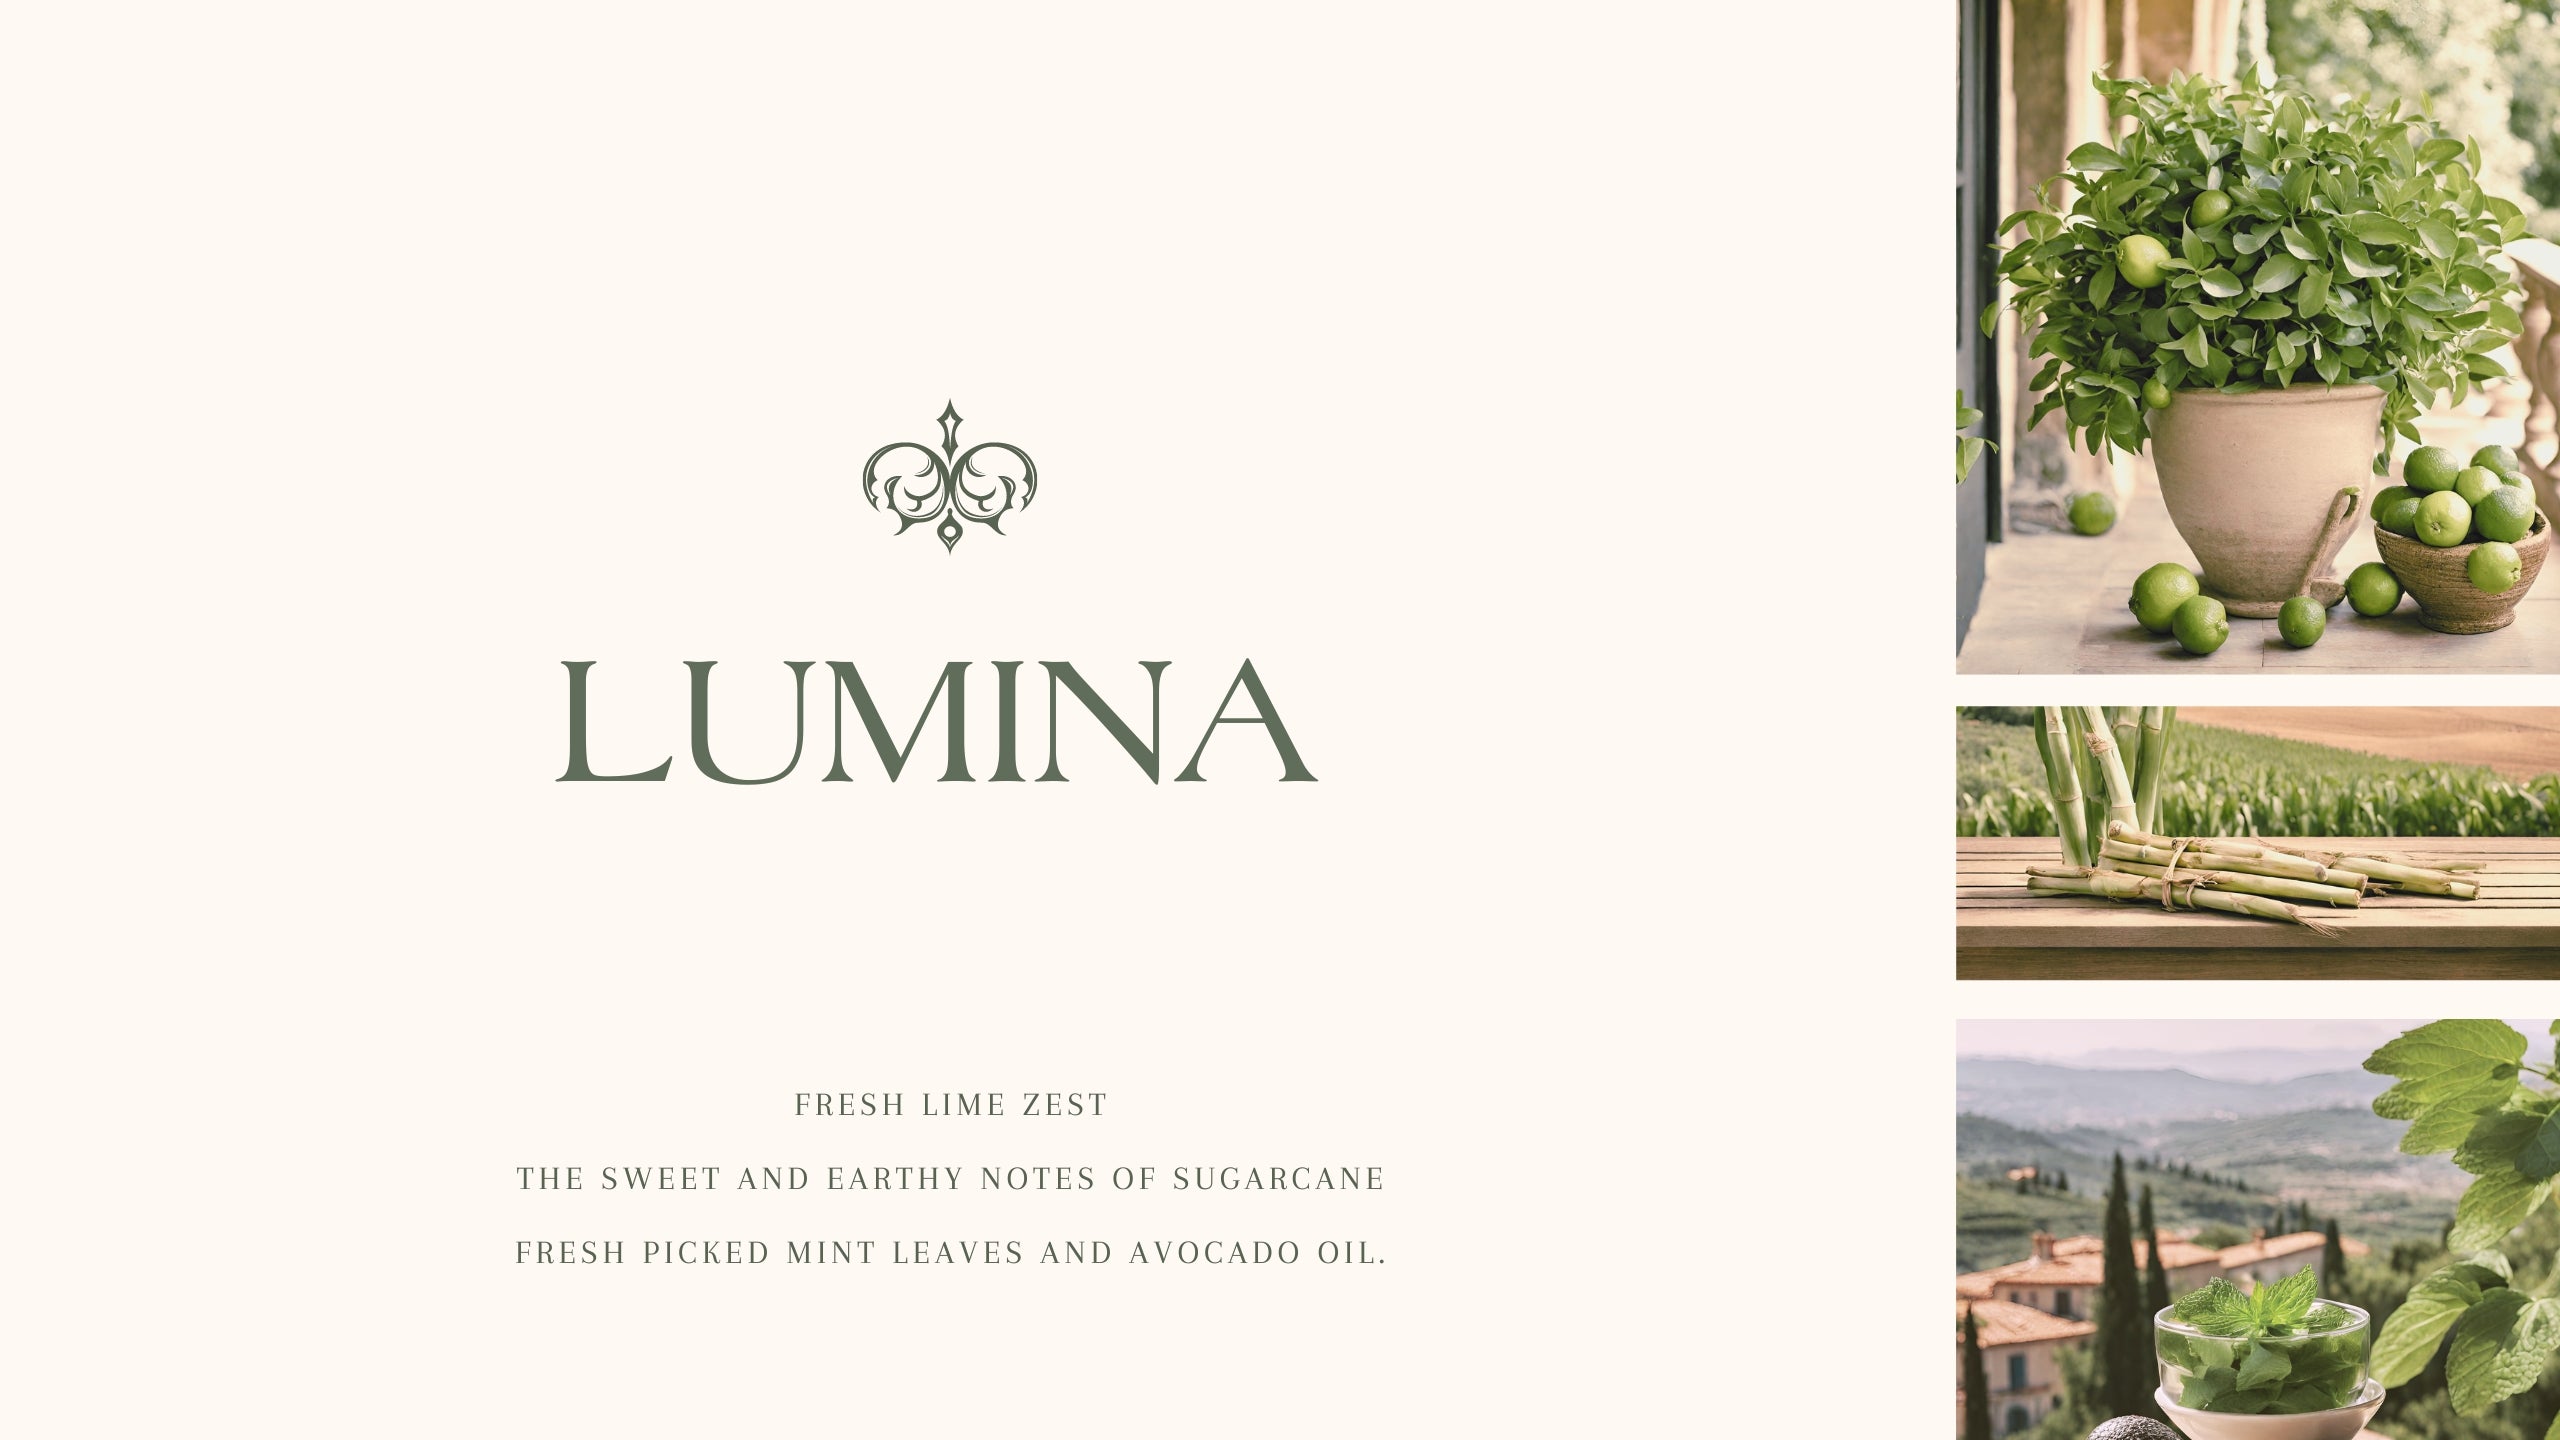 Light up your space with "Lumina"